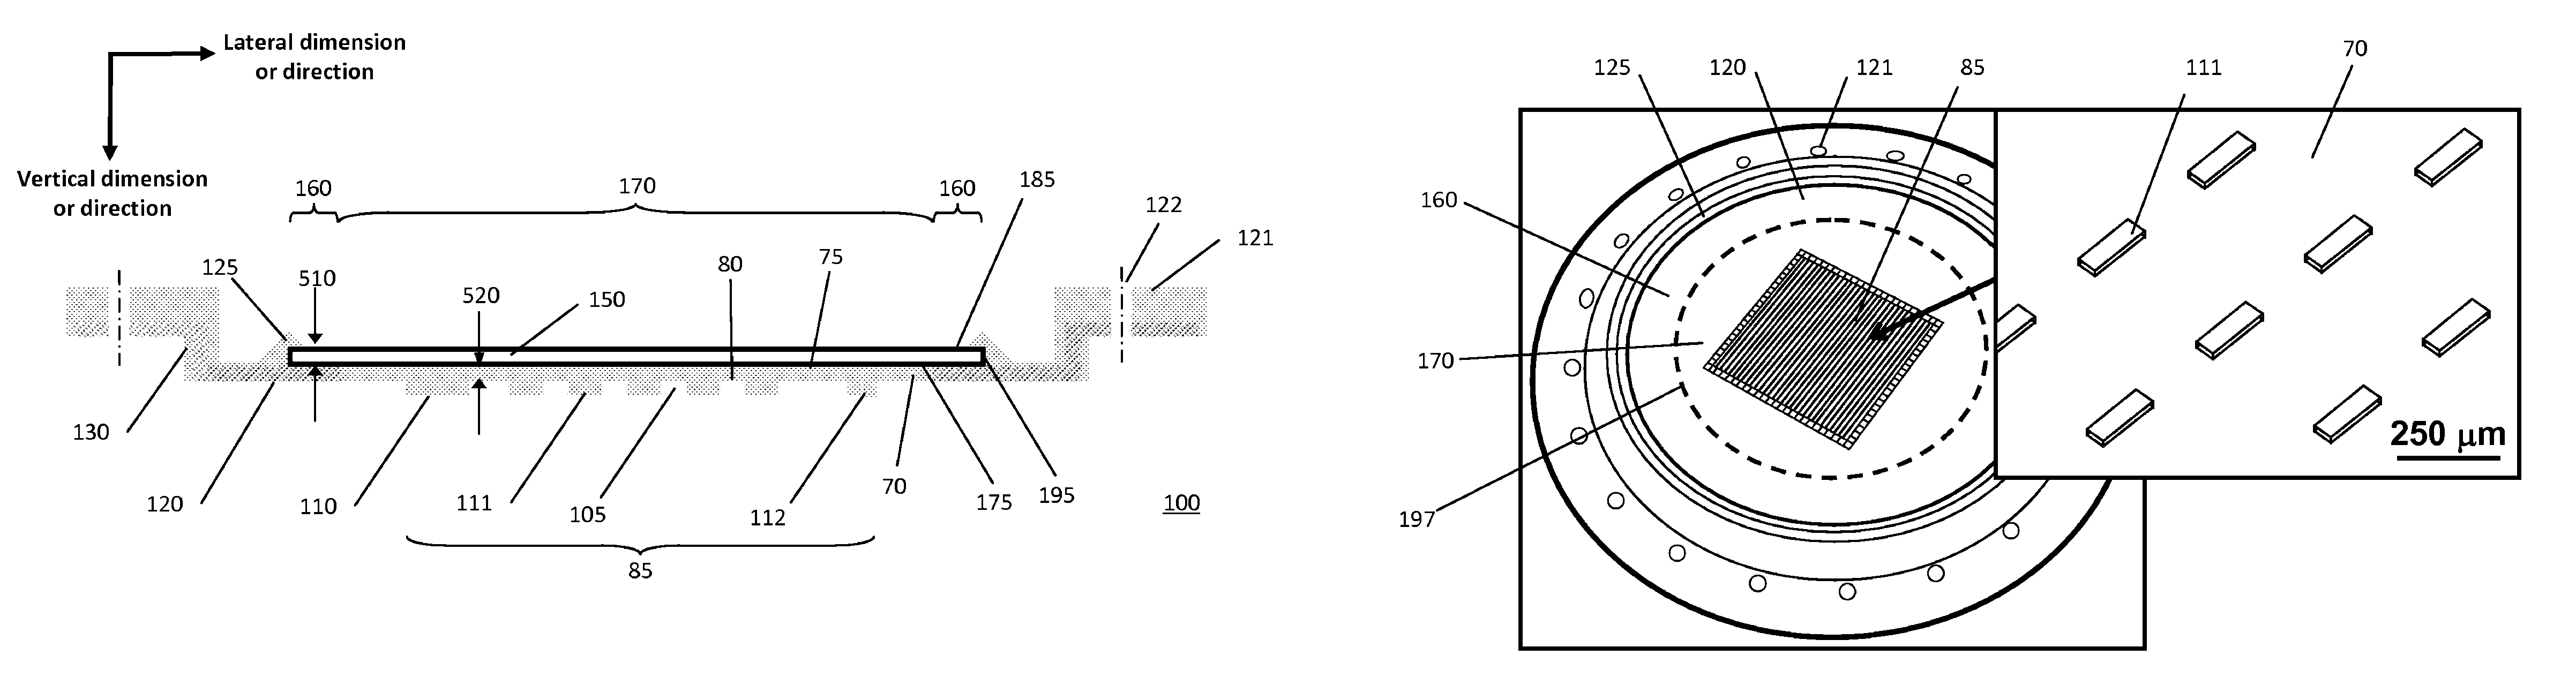 Reinforced composite stamp for dry transfer printing of semiconductor elements